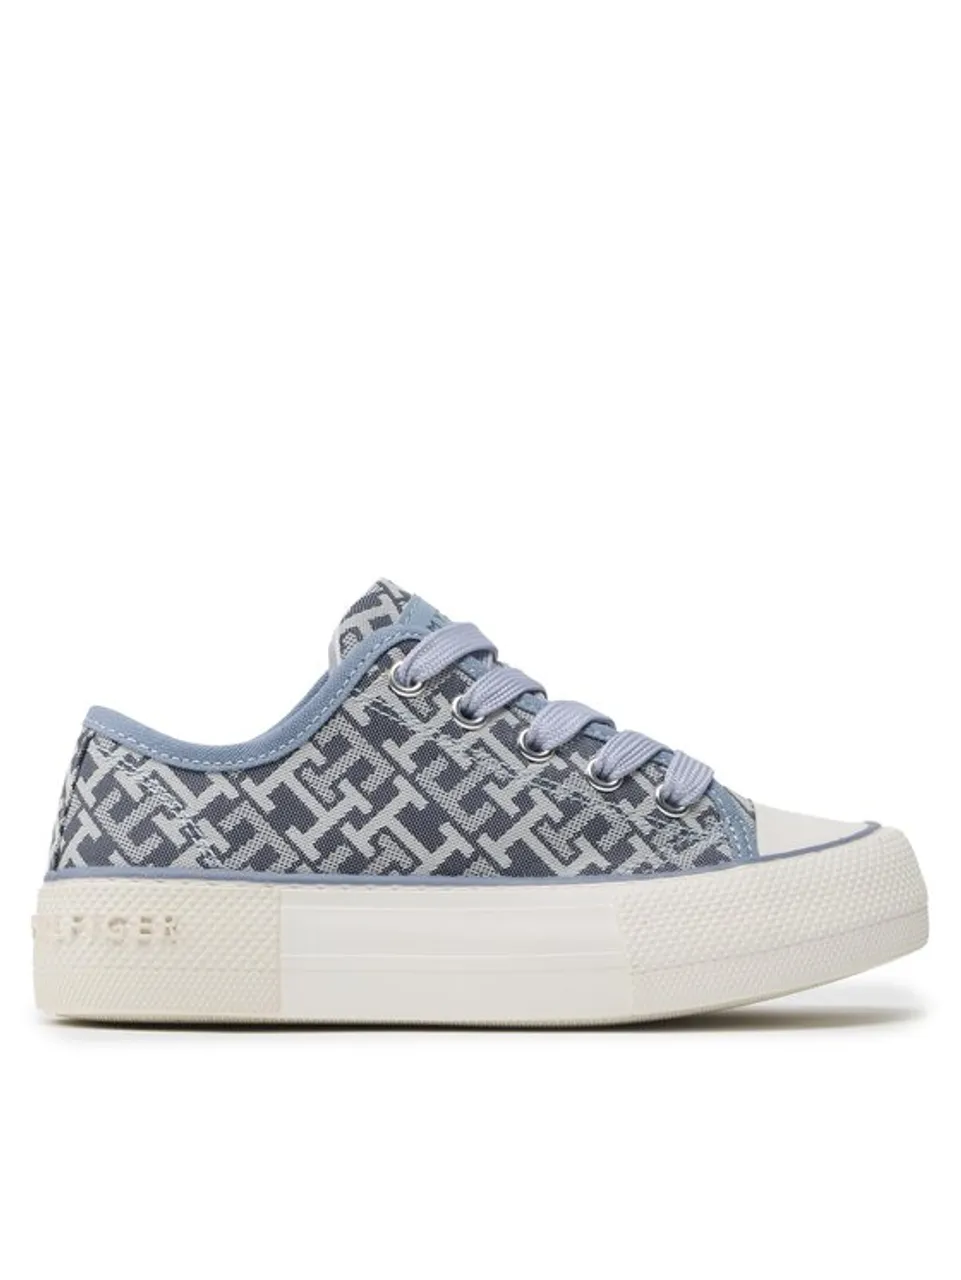 Tommy Hilfiger Sneakers aus Stoff Logo Allover Low Cut Lace-Up Sneaker T3A9-32675-0034 M Himmelblau